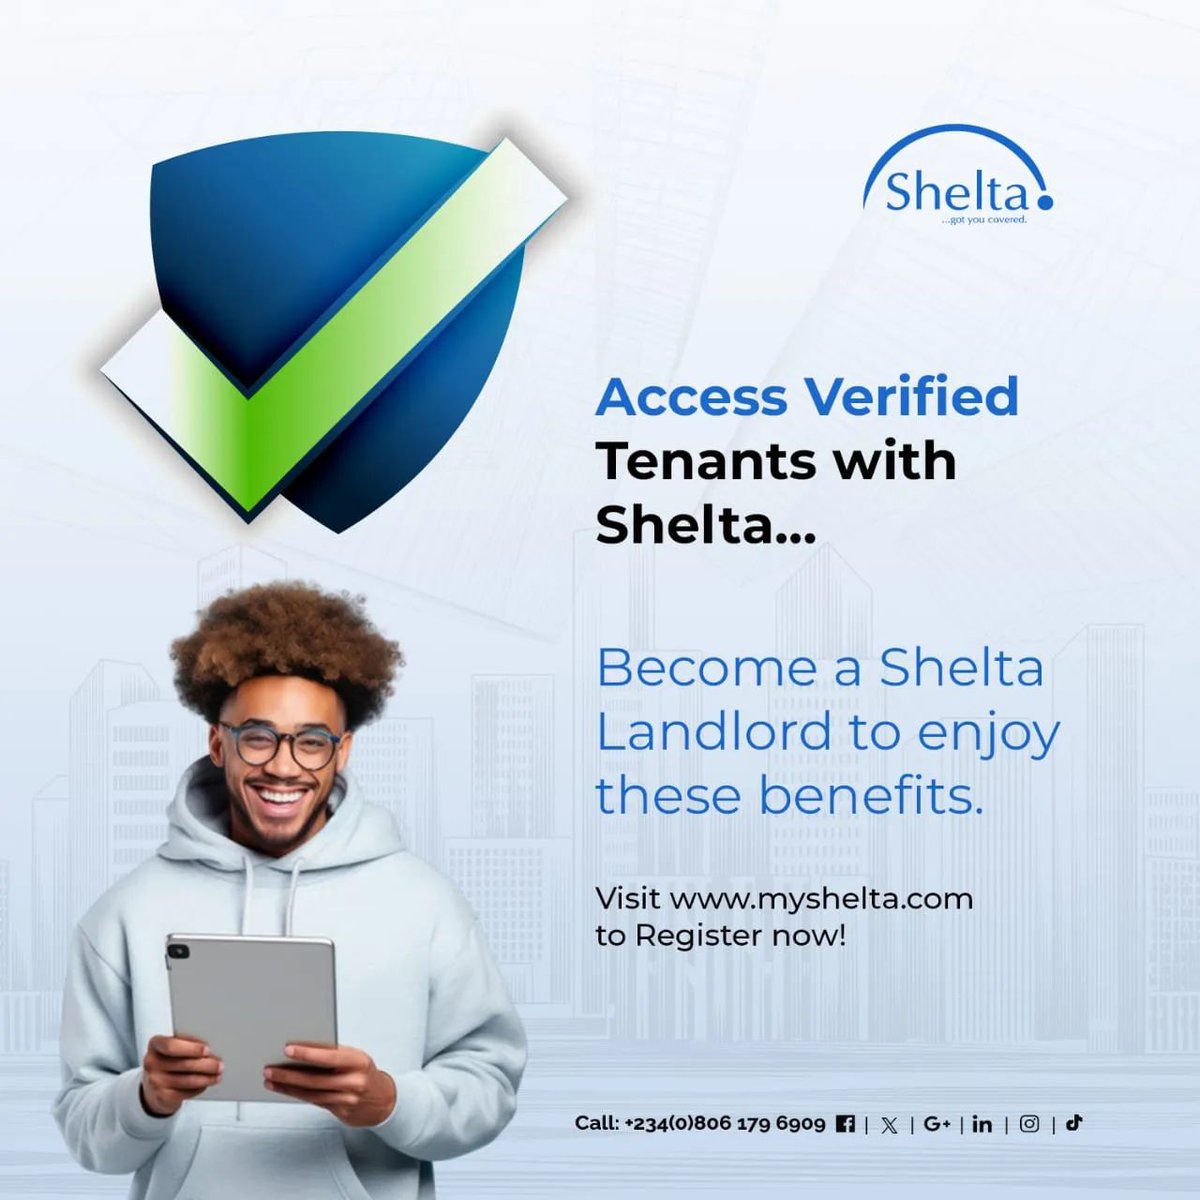 Verified Tenants only! Zero issues for Shelta Landlords.... You don't have to struggle with inconsistent rent payments and property maintenance issues with tenants... It's different with Shelta! As a Registered Shelta Landlord, You have nothing to worry about. With our…